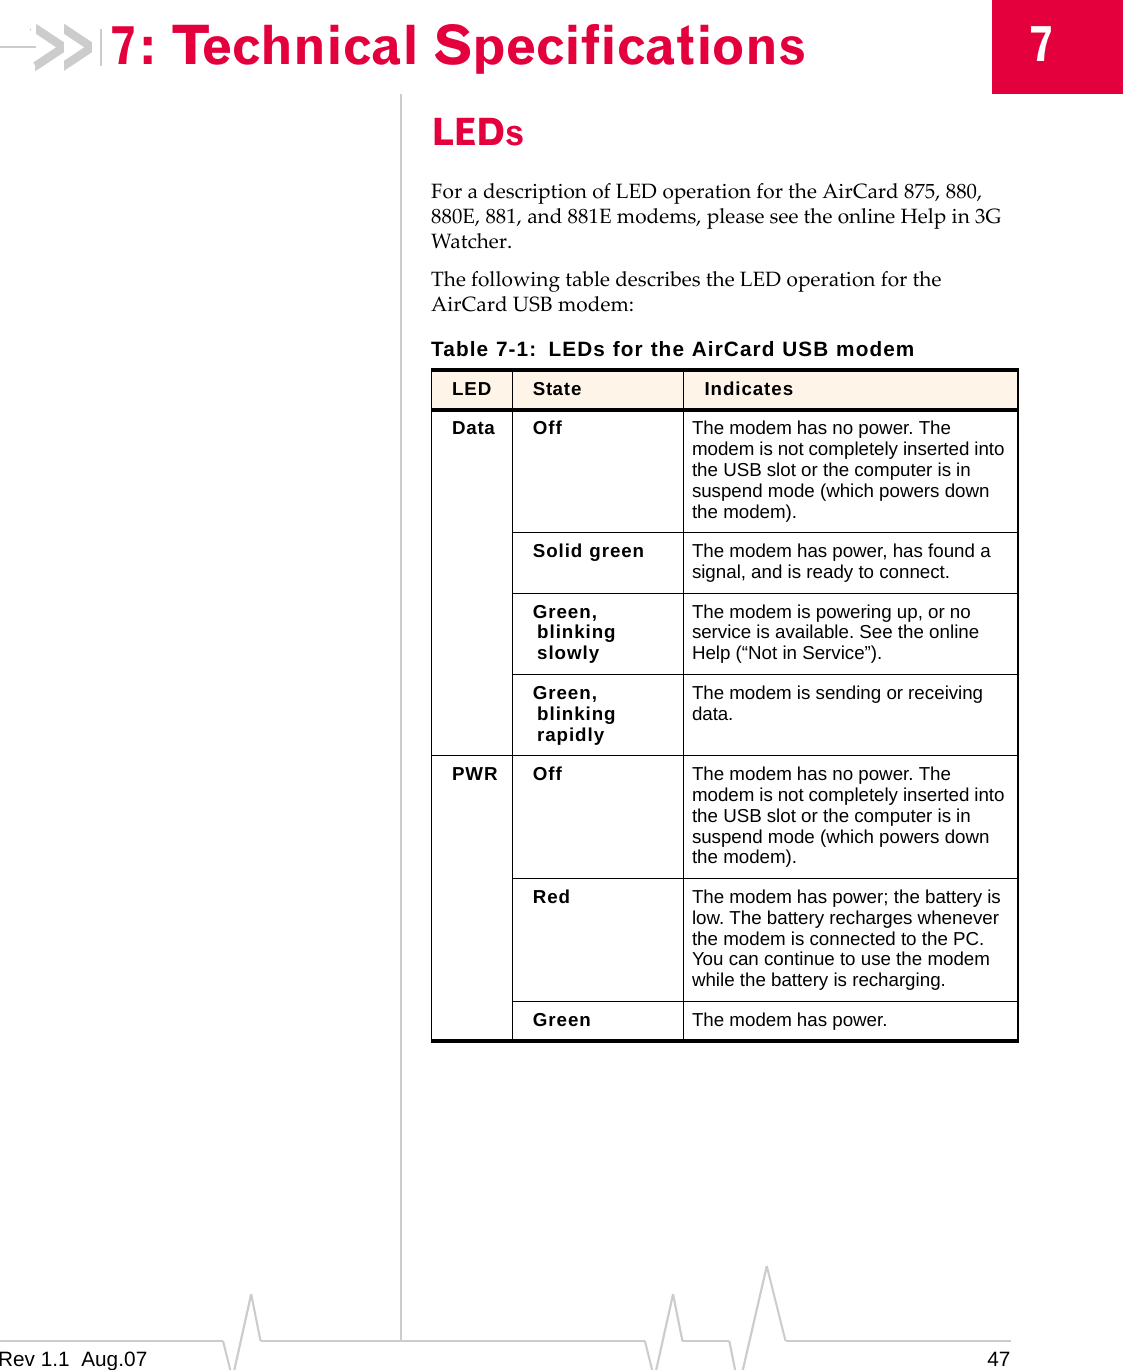 7: Technical Specifications LEDs For a description of LED operation for the AirCard 875, 880, 880E, 881, and 881E modems, please see the online Help in 3G Watcher. The following table describes the LED operation for the AirCard USB modem: Table 7-1:  LEDs for the AirCard USB modem 7 LED  State  Indicates Data  Off  The modem has no power. The modem is not completely inserted into the USB slot or the computer is in suspend mode (which powers down the modem). Solid green  The modem has power, has found a signal, and is ready to connect. Green, blinking slowly The modem is powering up, or no service is available. See the online Help (“Not in Service”). Green, blinking rapidly The modem is sending or receiving data. PWR  Off  The modem has no power. The modem is not completely inserted into the USB slot or the computer is in suspend mode (which powers down the modem). Red  The modem has power; the battery is low. The battery recharges whenever the modem is connected to the PC. You can continue to use the modem while the battery is recharging. Green  The modem has power. Rev 1.1  Aug.07  47 